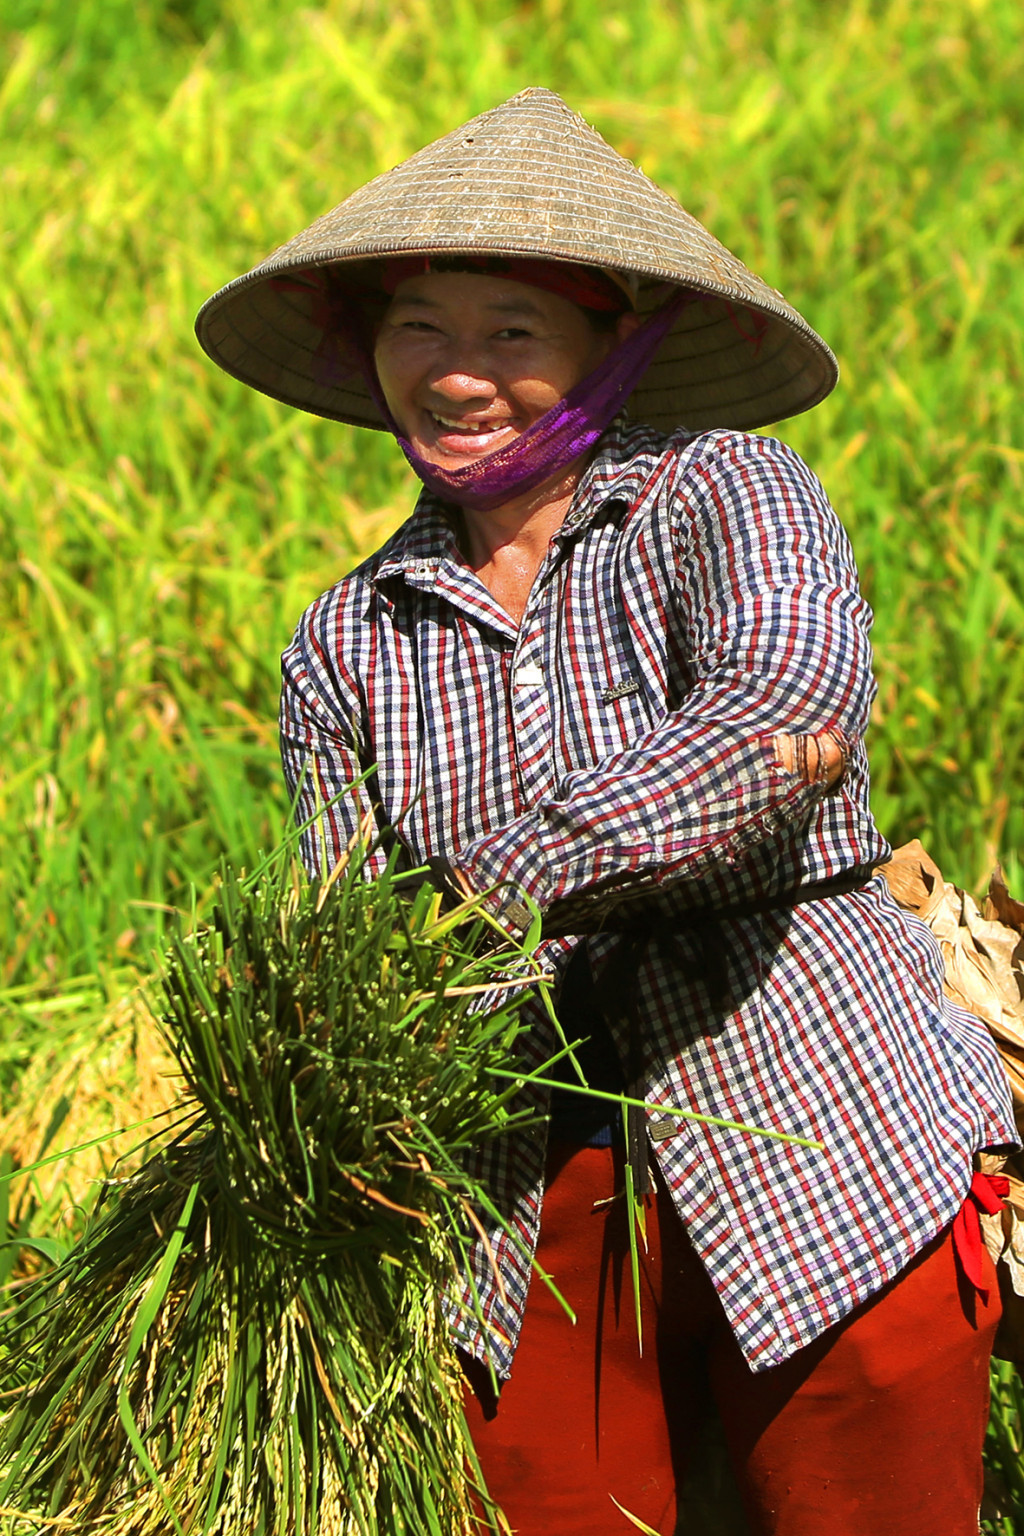 Be happy with a fruitful harvest. Photo: Nguyen Long Giang